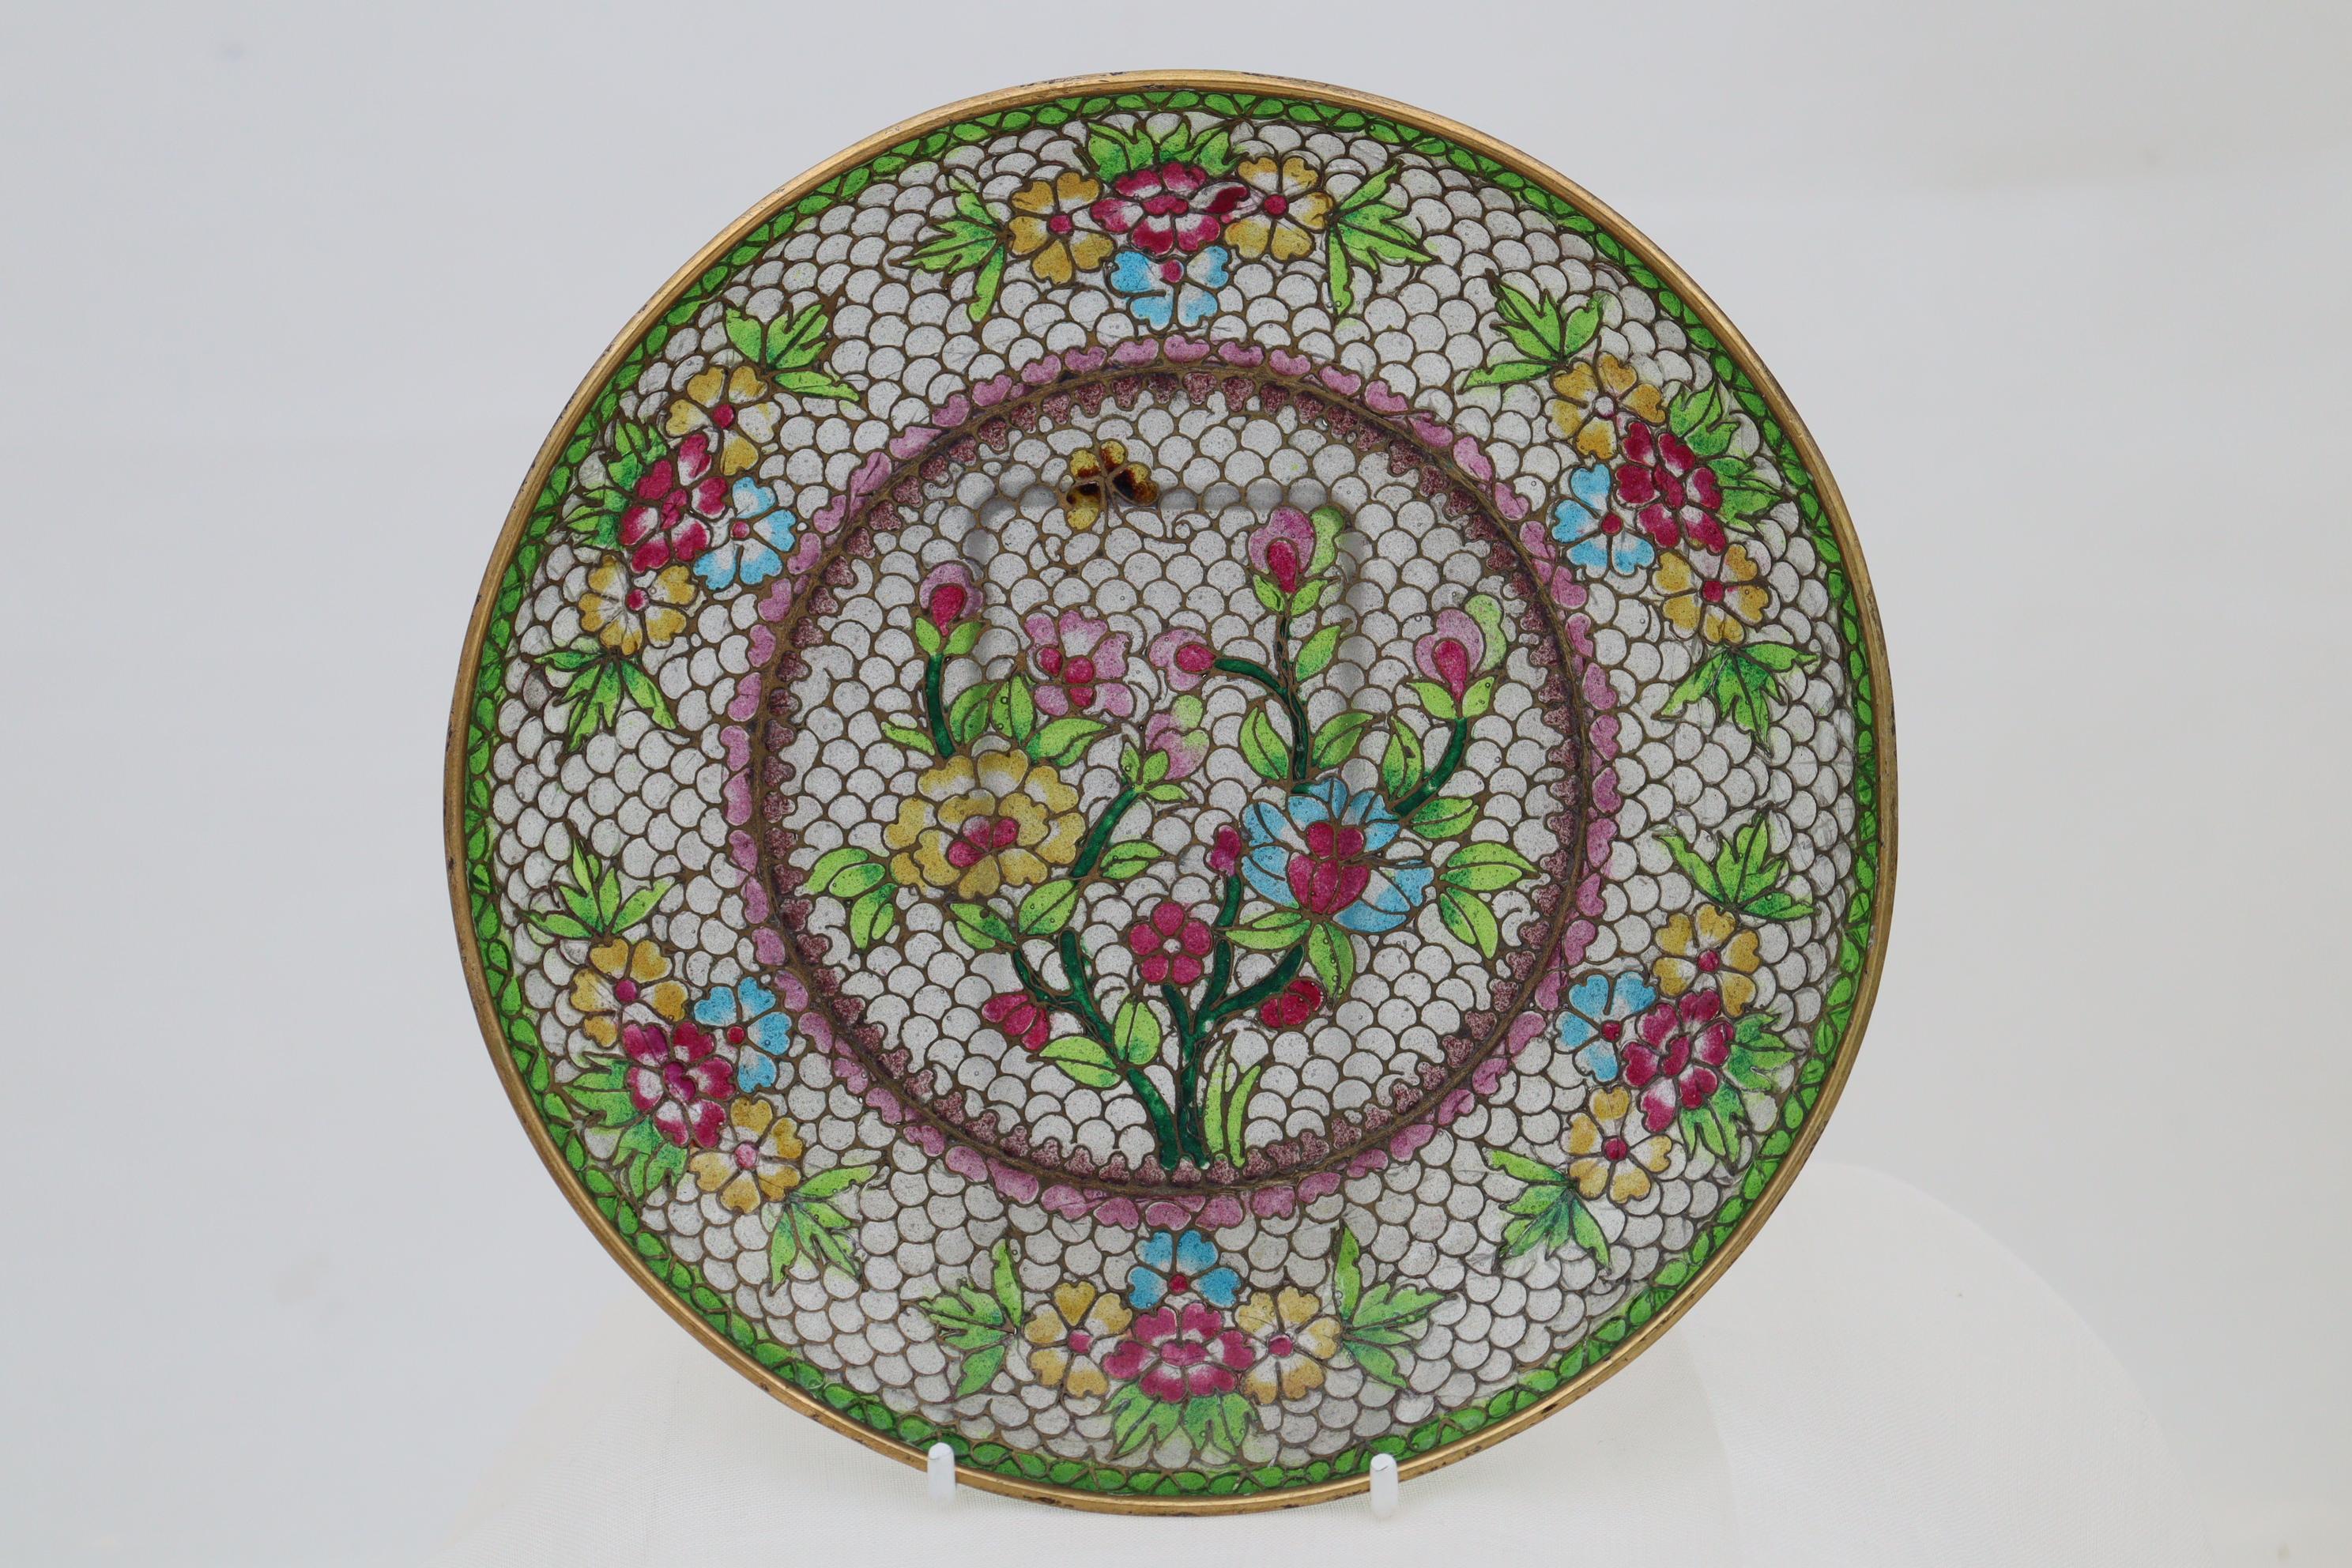 This Chinese plique-a-jour (French for glimpse of the day) dish is effectively a small stained glass window, decorated with a spray of flowers and a butterfly to the centre, and smaller sprays to the rim. The glass is held in small cells made of